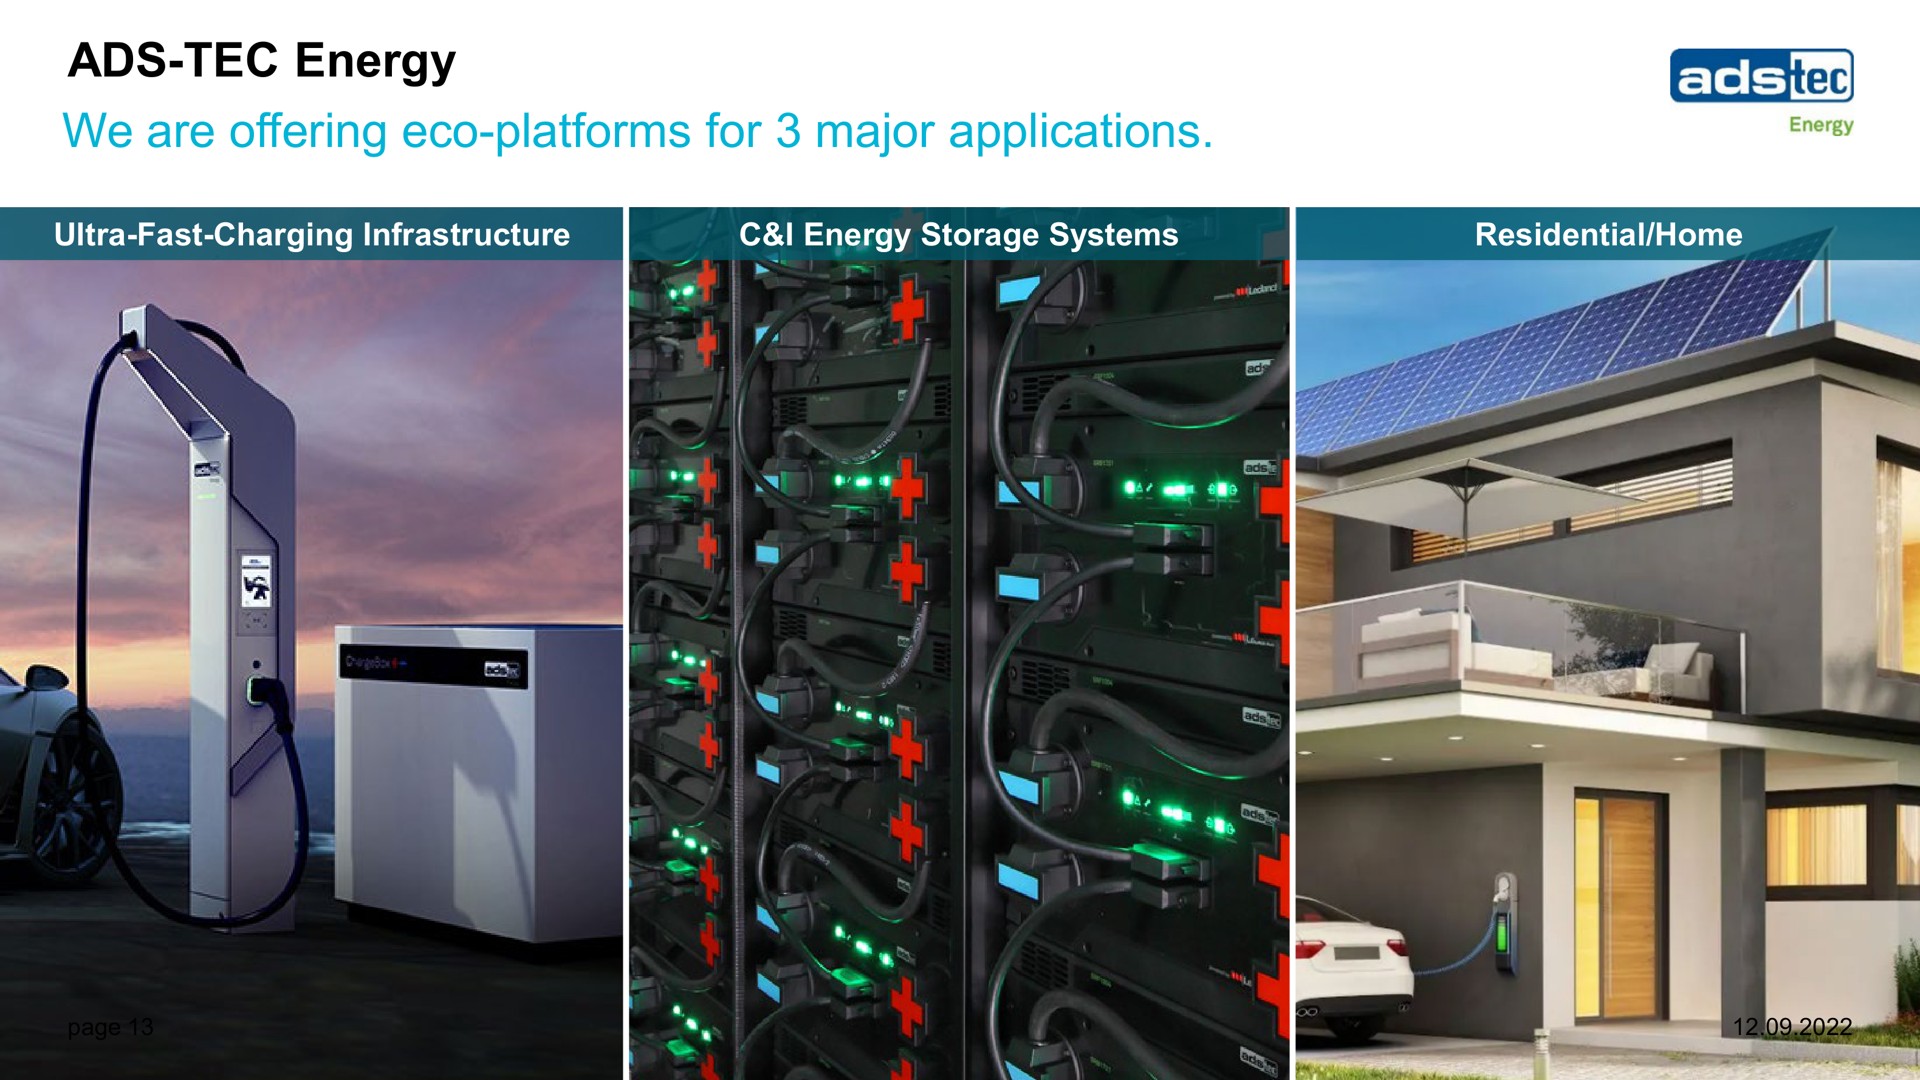 ads tec energy we are offering platforms for major applications a i | ads-tec Energy